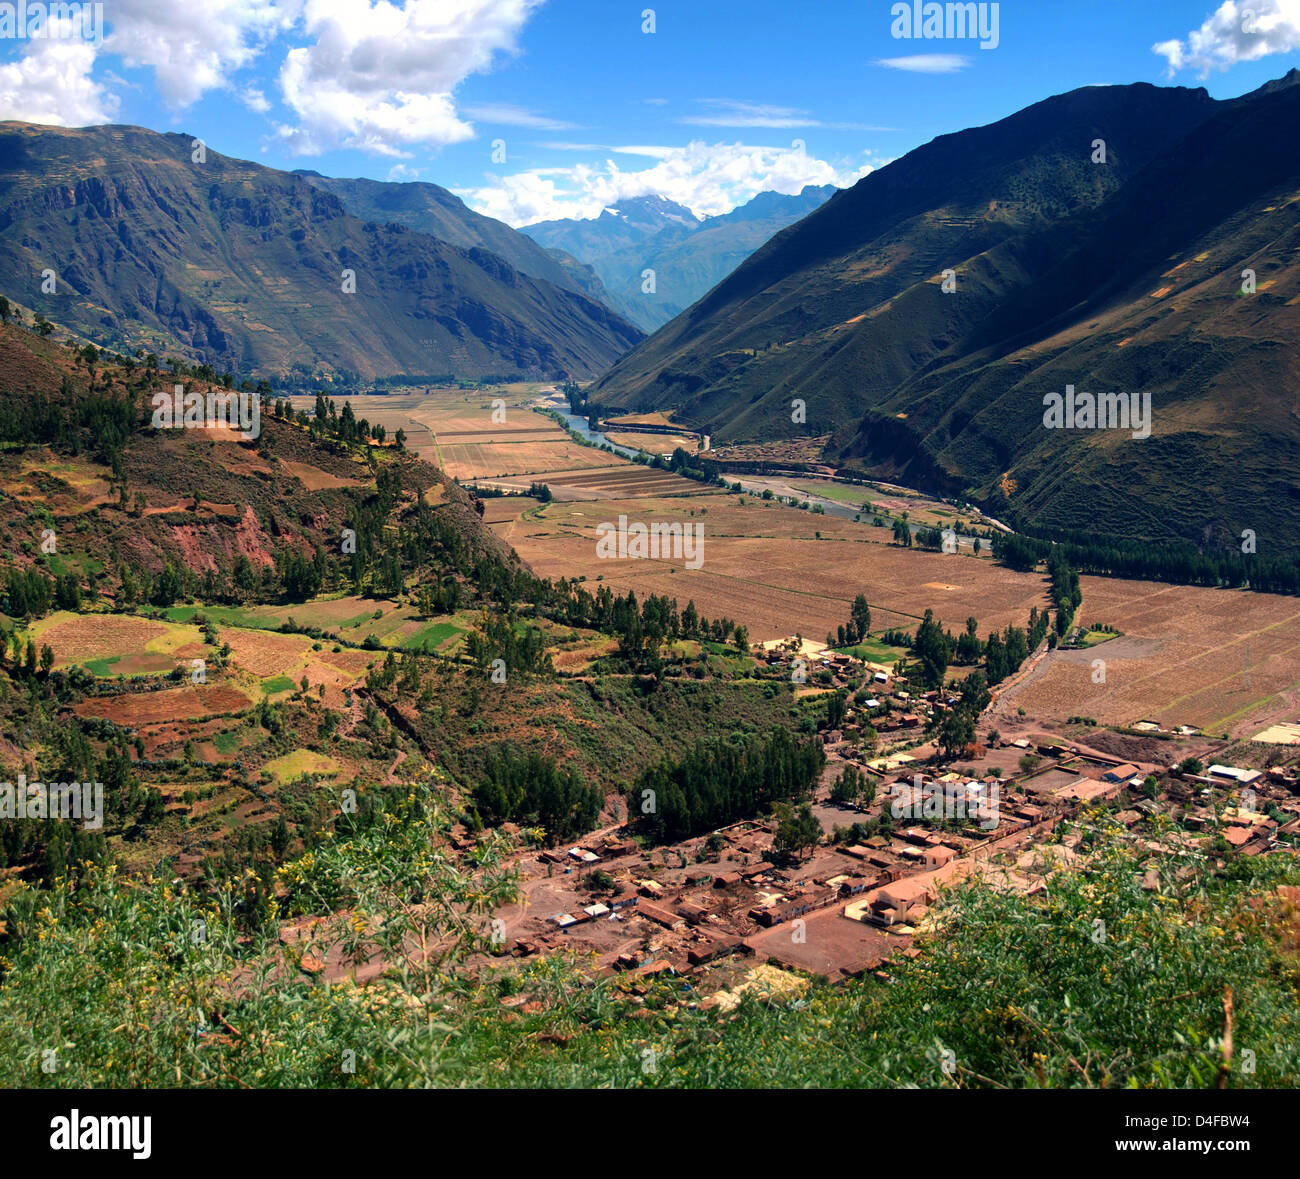 Sacred Valley landscape in the Peruvian Andes Stock Photo